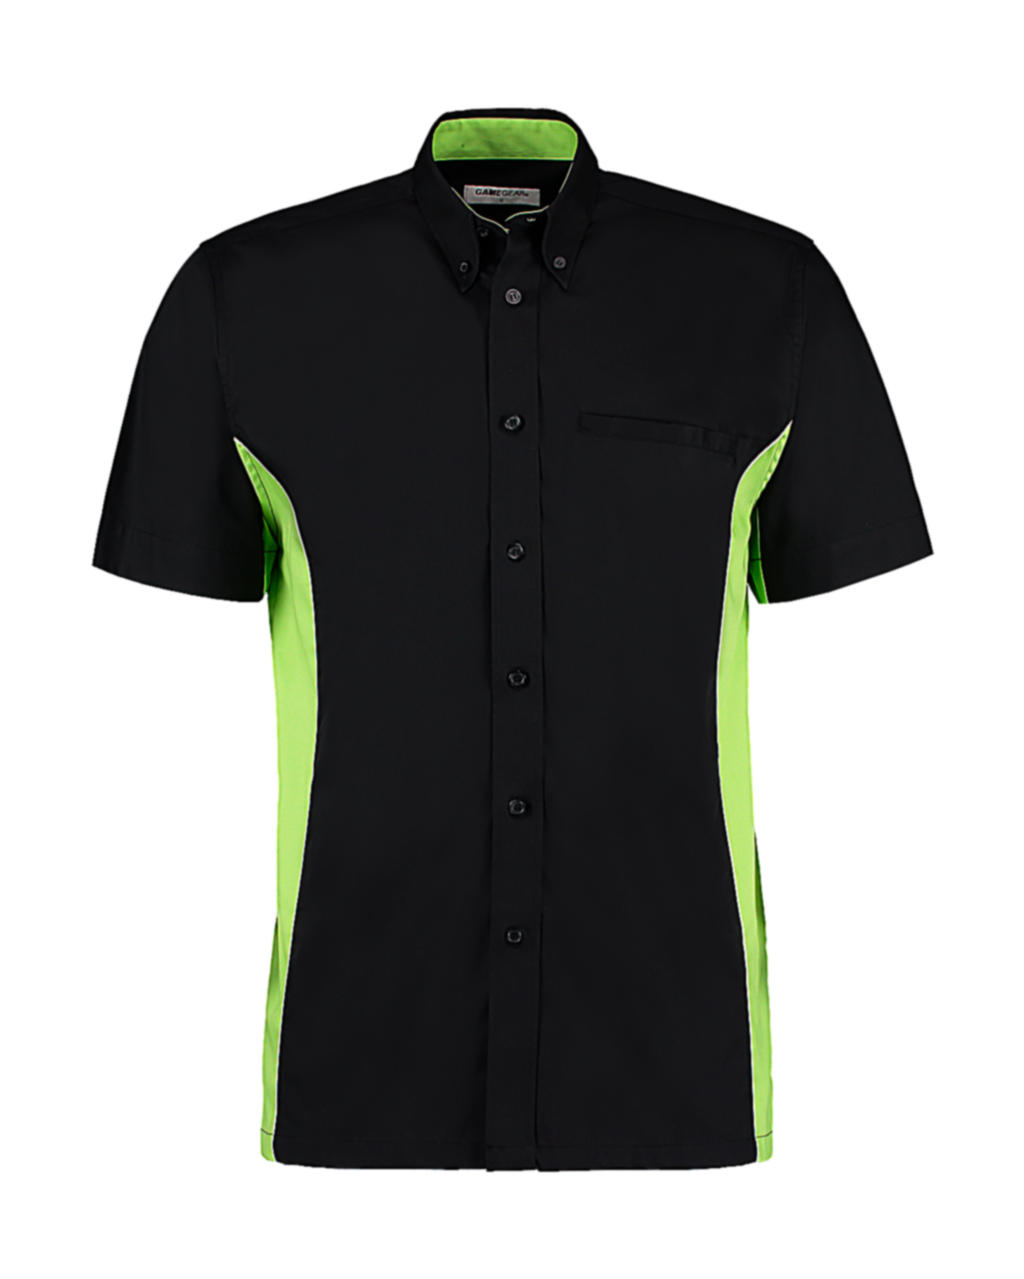  Classic Fit Sportsman Shirt SSL in Farbe Black/Lime/White